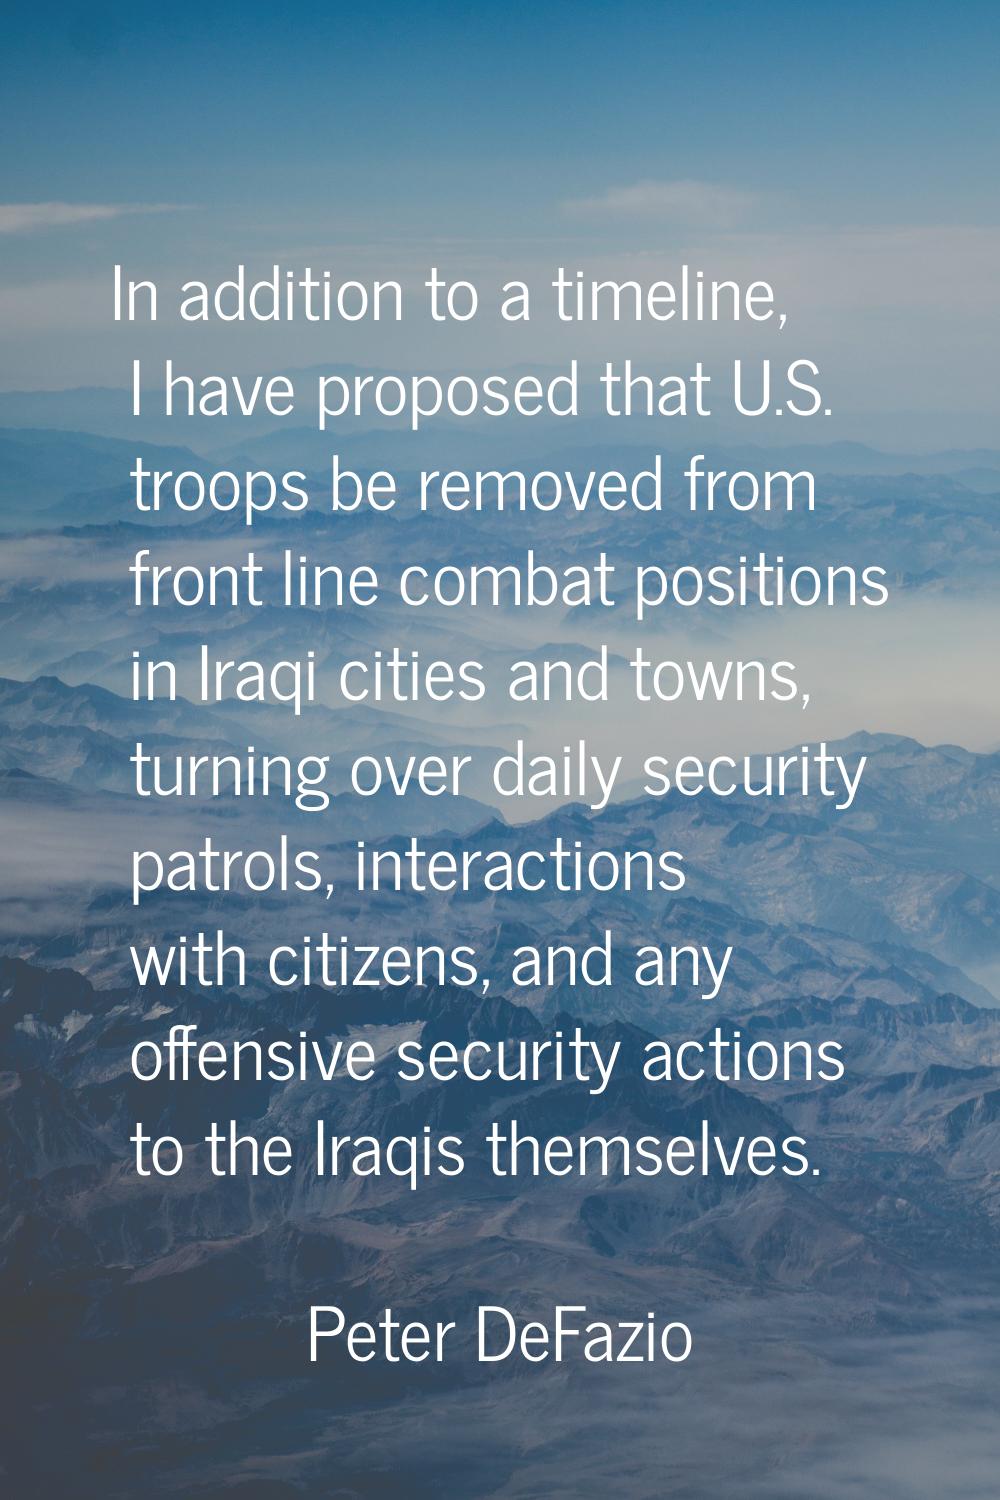 In addition to a timeline, I have proposed that U.S. troops be removed from front line combat posit